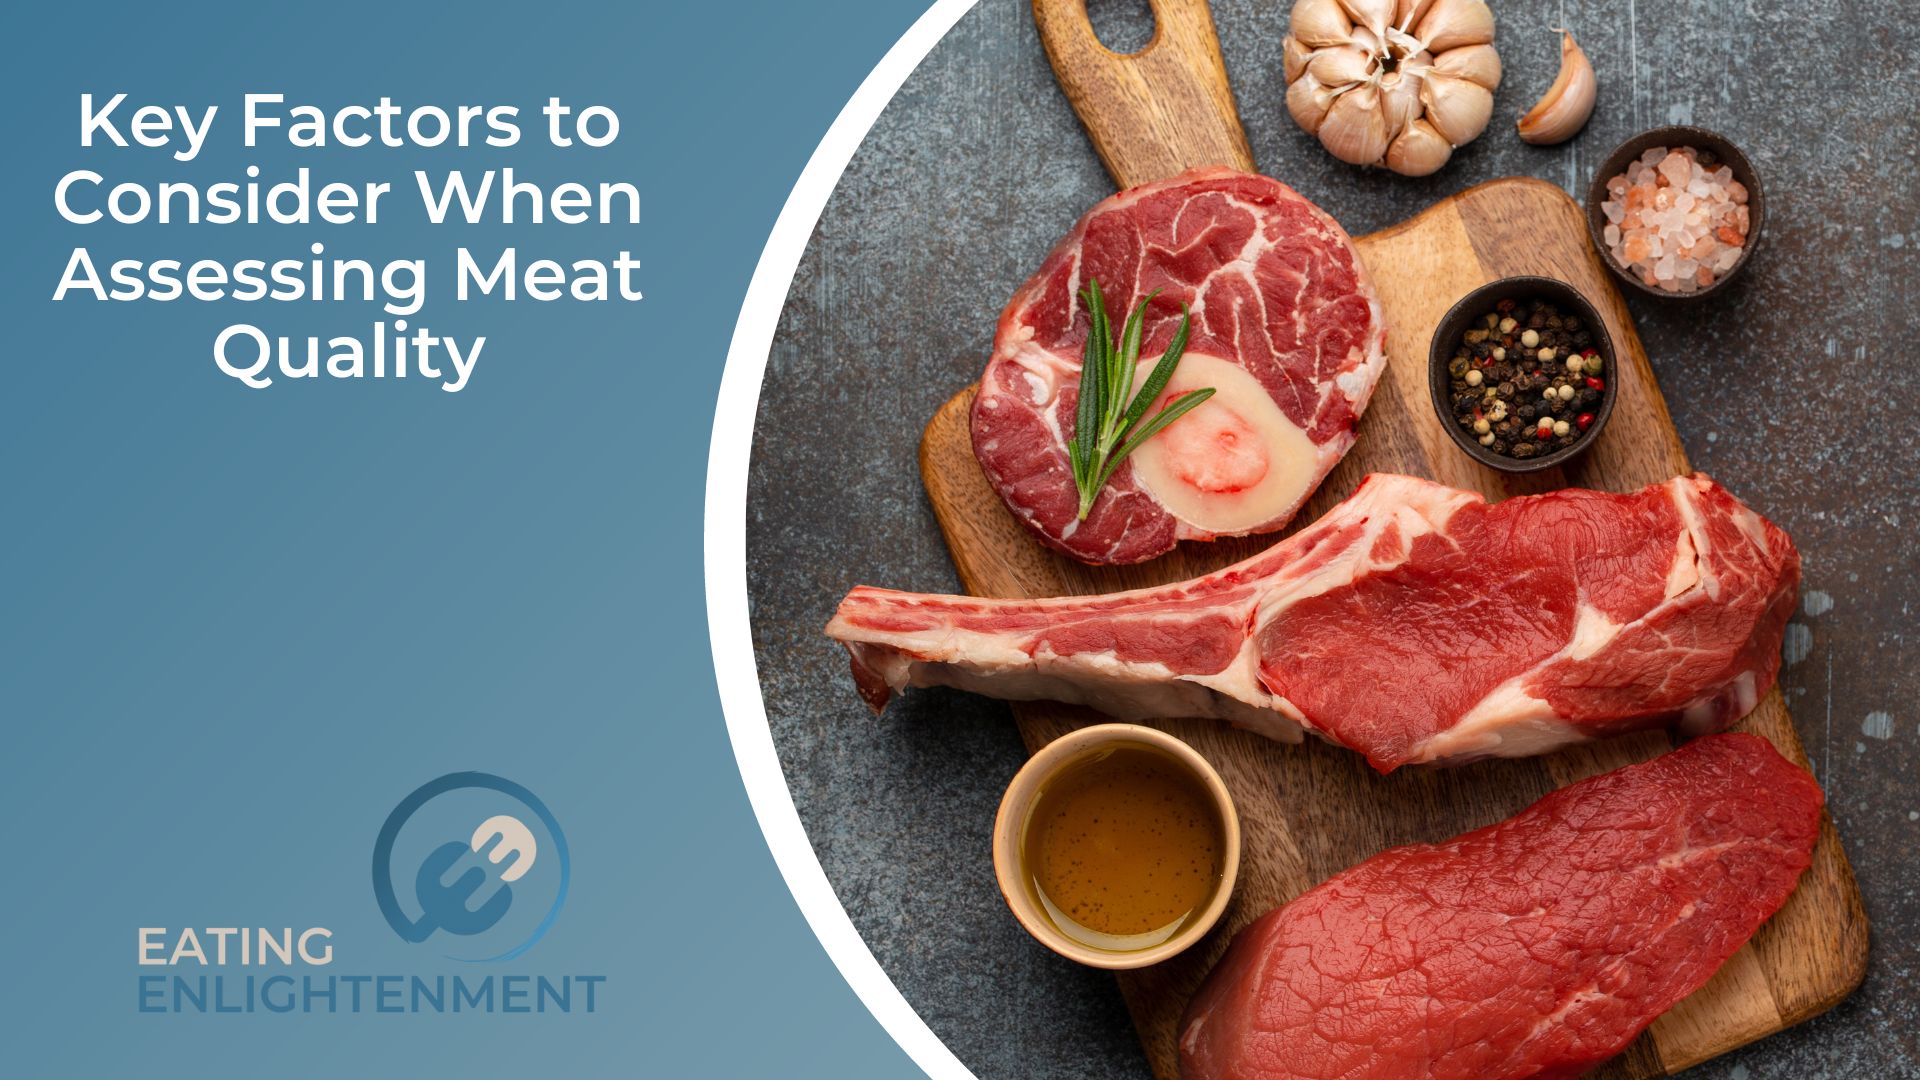 Key Factors to Consider When Assessing Meat Quality